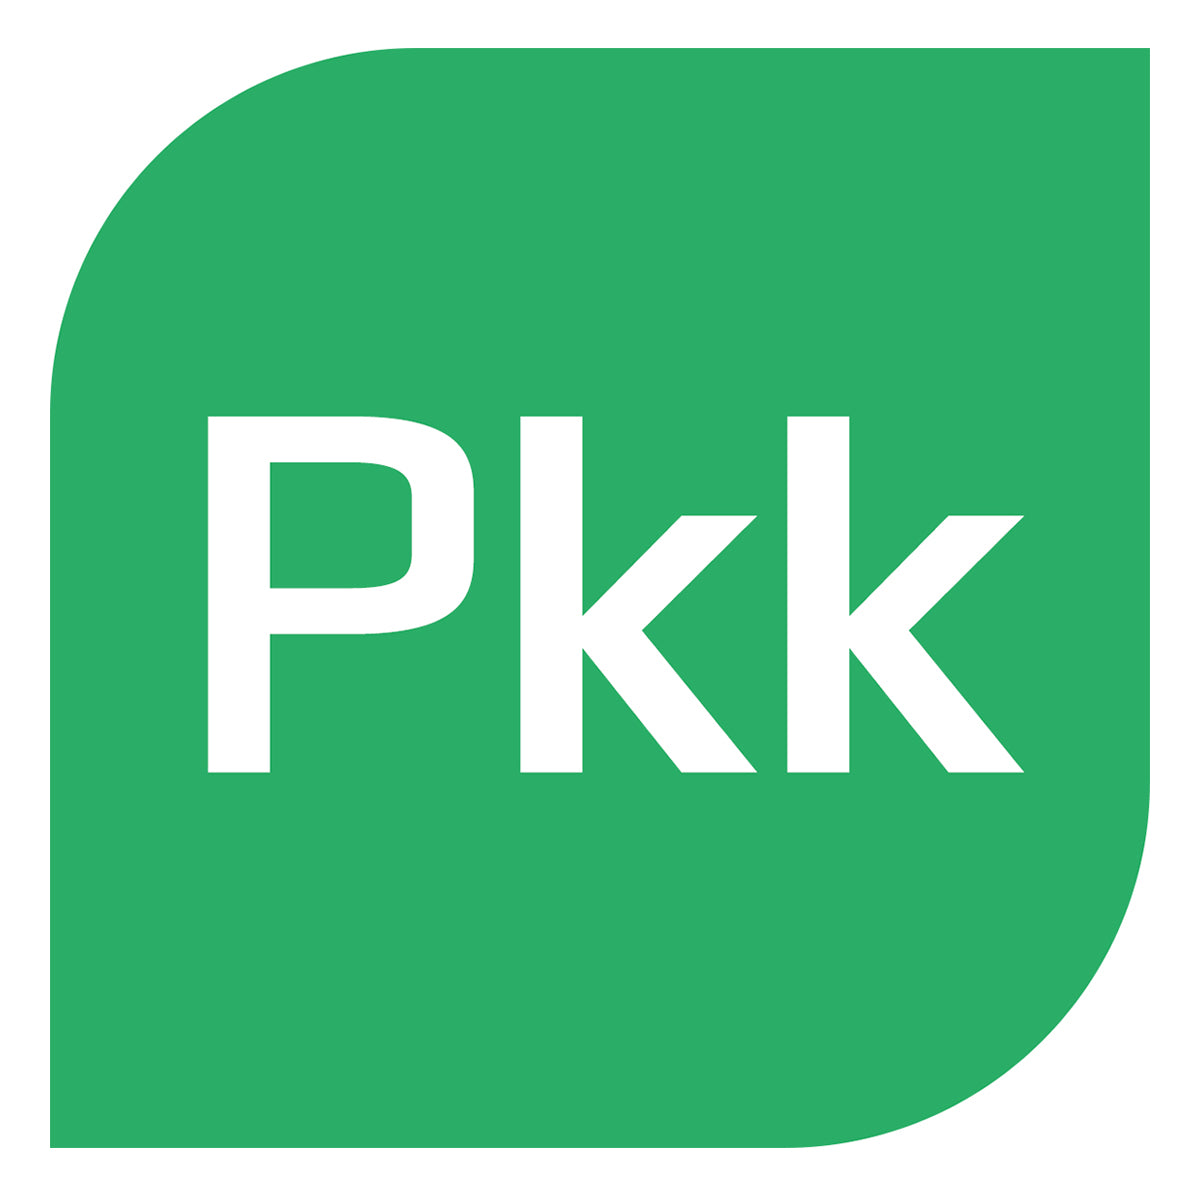 Hire Shopify Experts to integrate PrintKK : Free Print on Demand app into a Shopify store